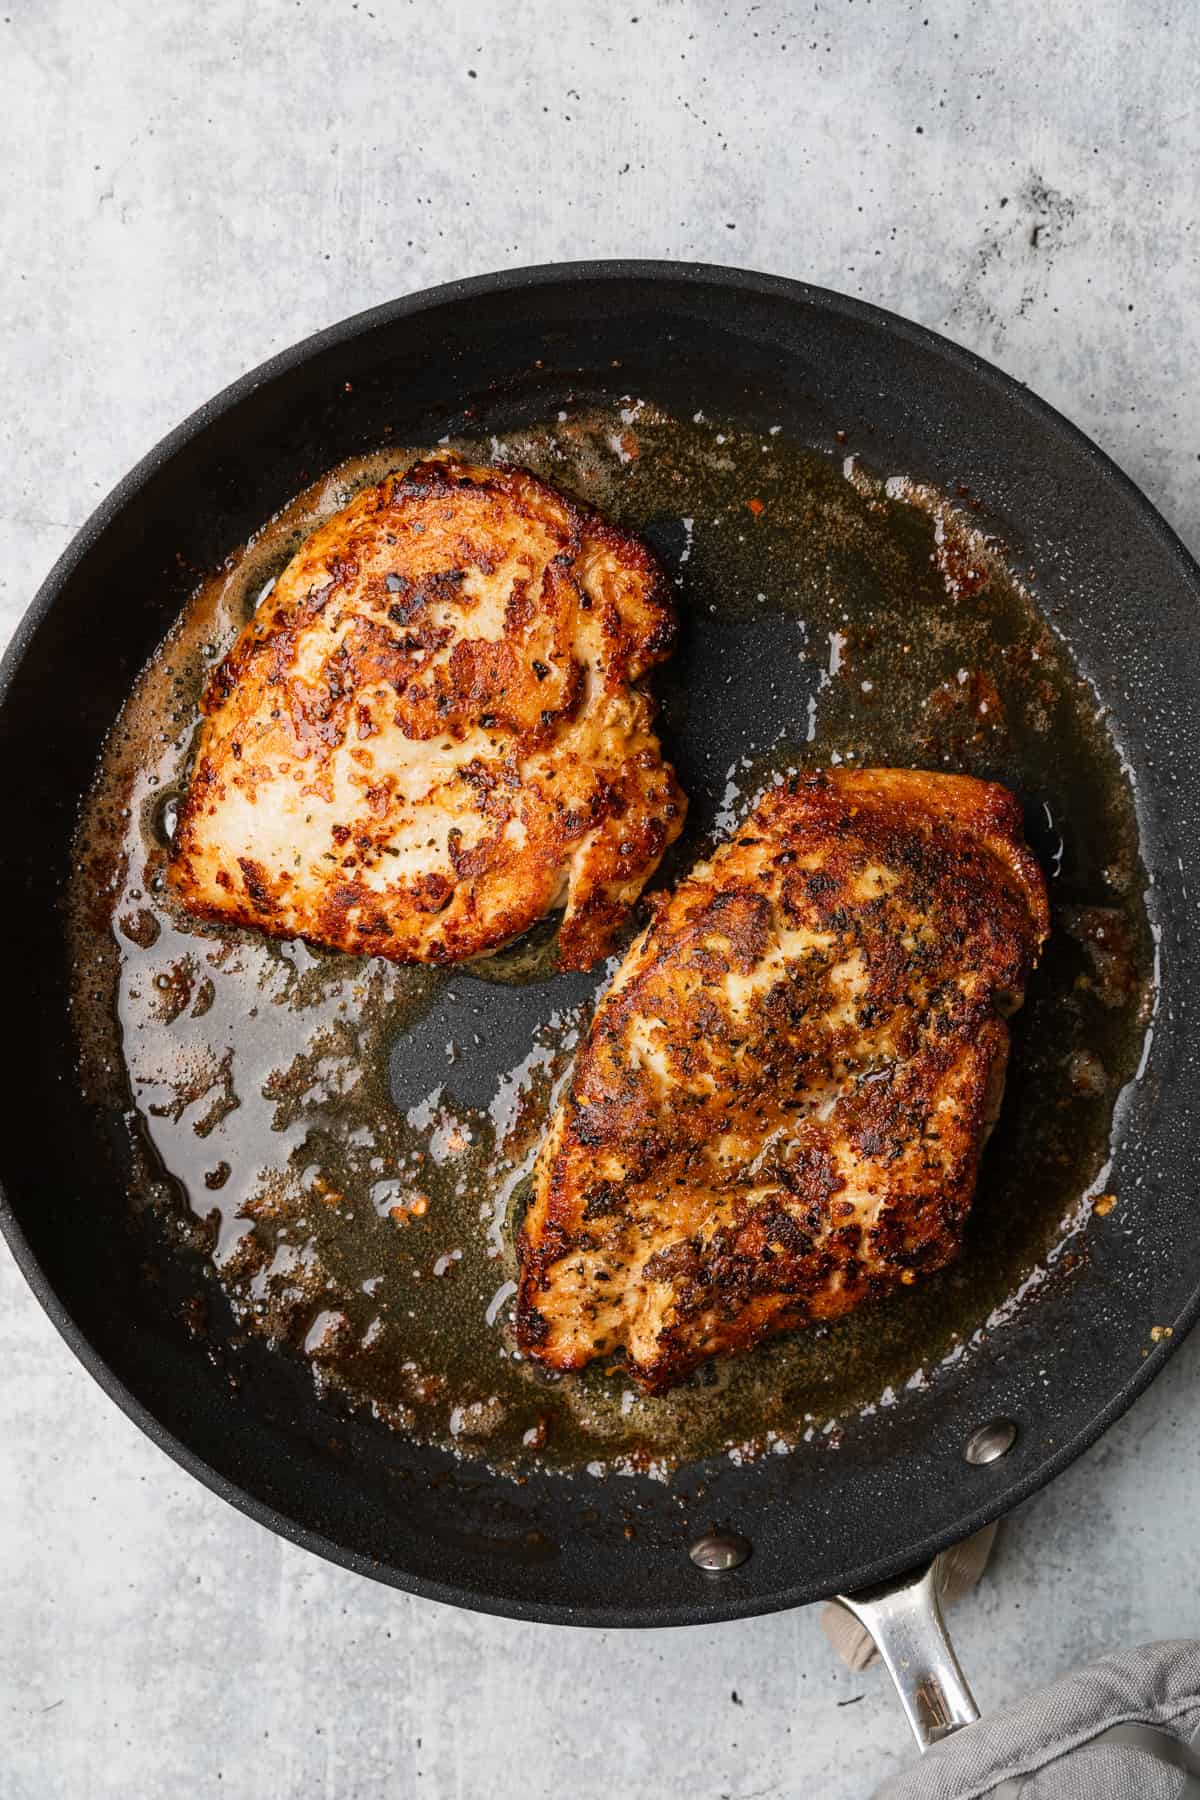 Cooking the chicken in a skillet to make the recipe.